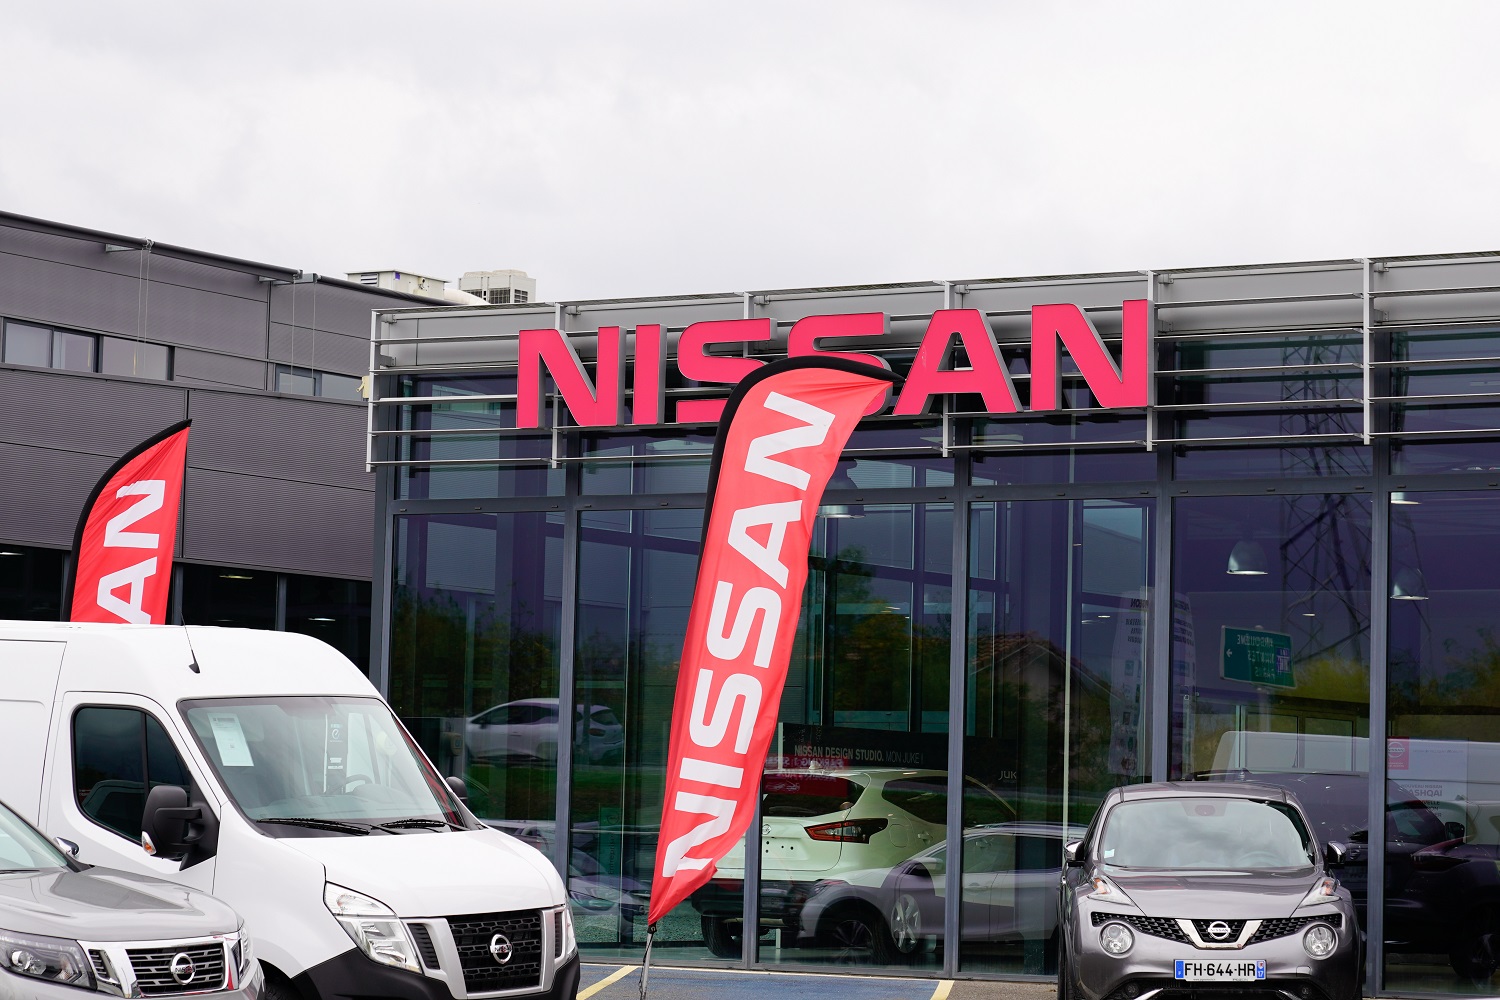 Nissan saw a 25x return on their Google Maps advertising spend